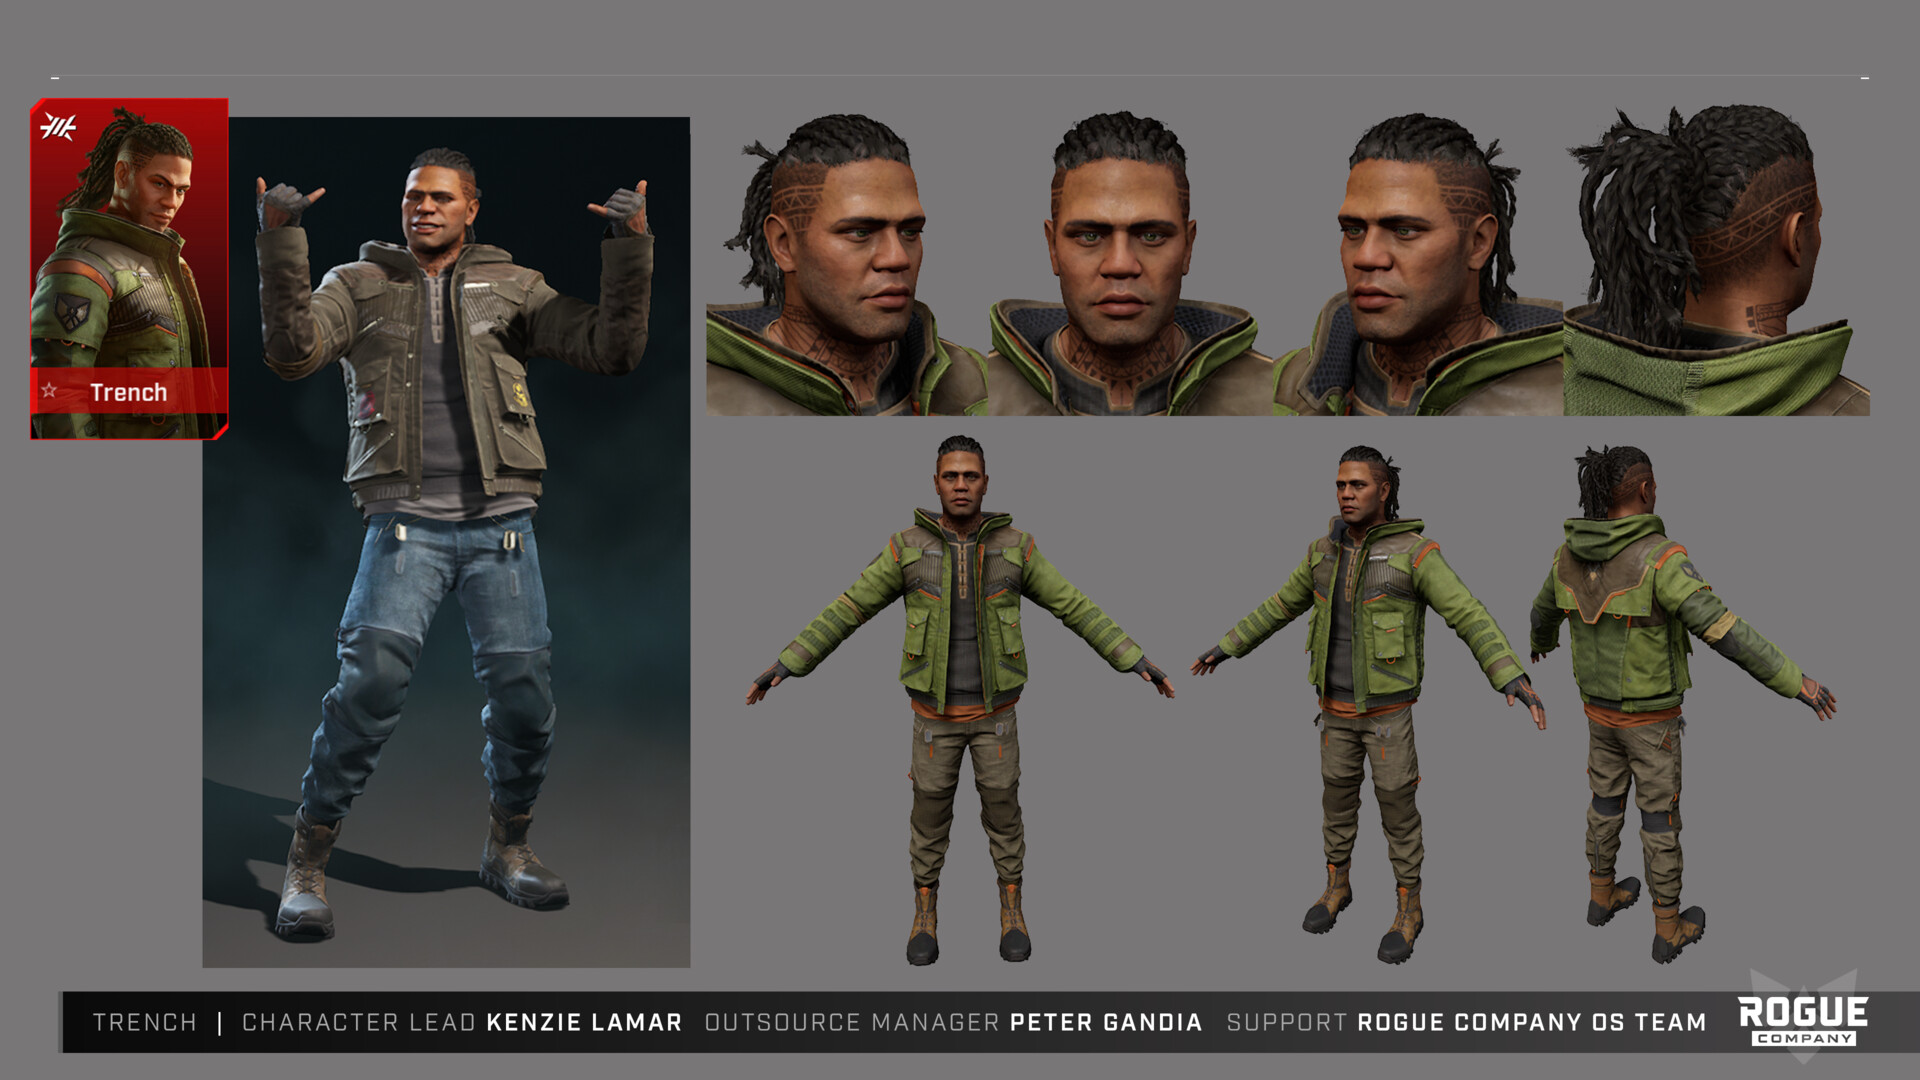 davekeen: “More character concept work for Rogue Company game